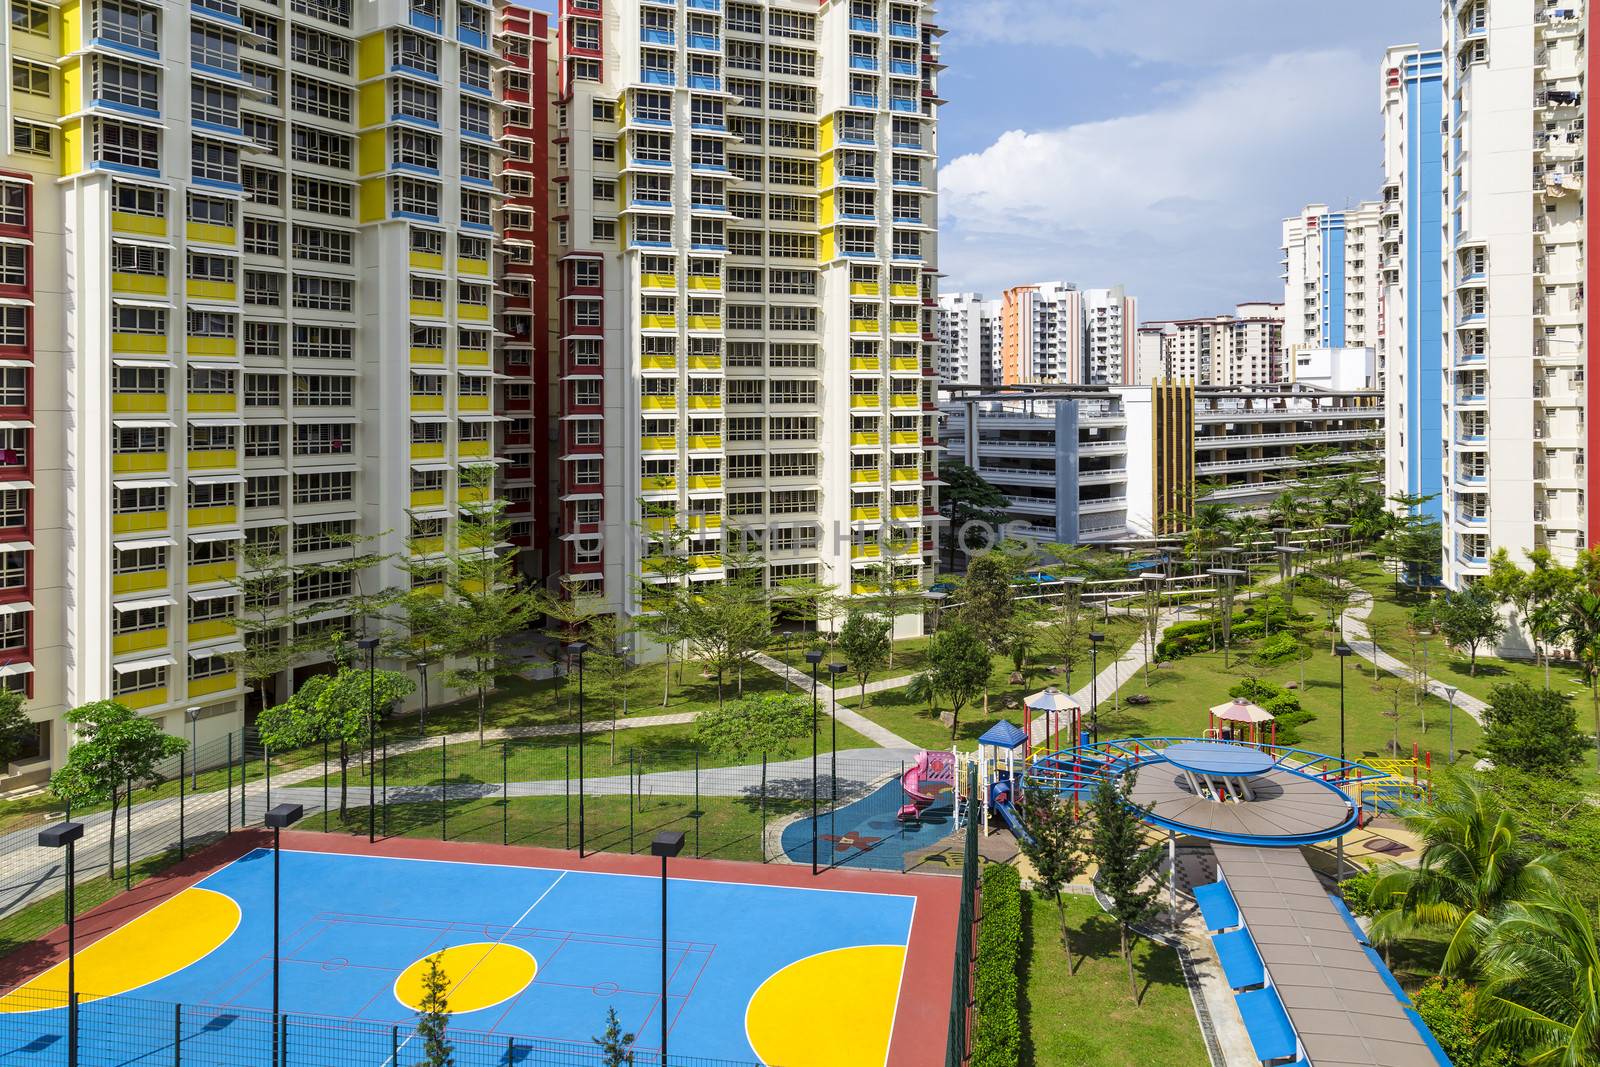 A new apartment neighborhood with carpark and playground.